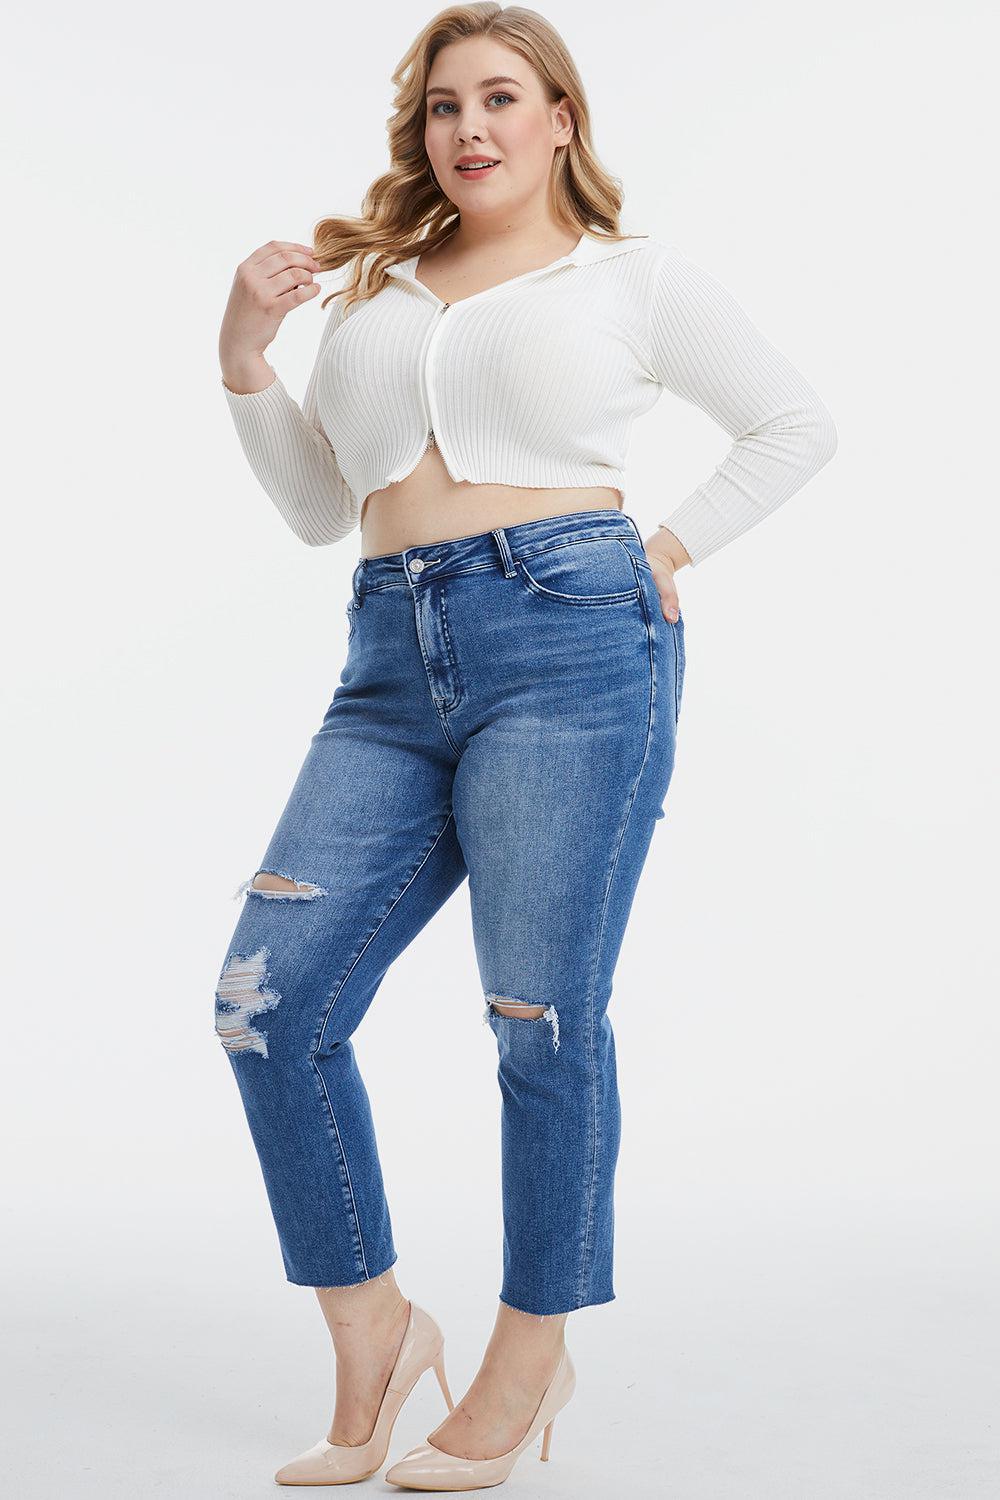 a woman in a white top and ripped jeans